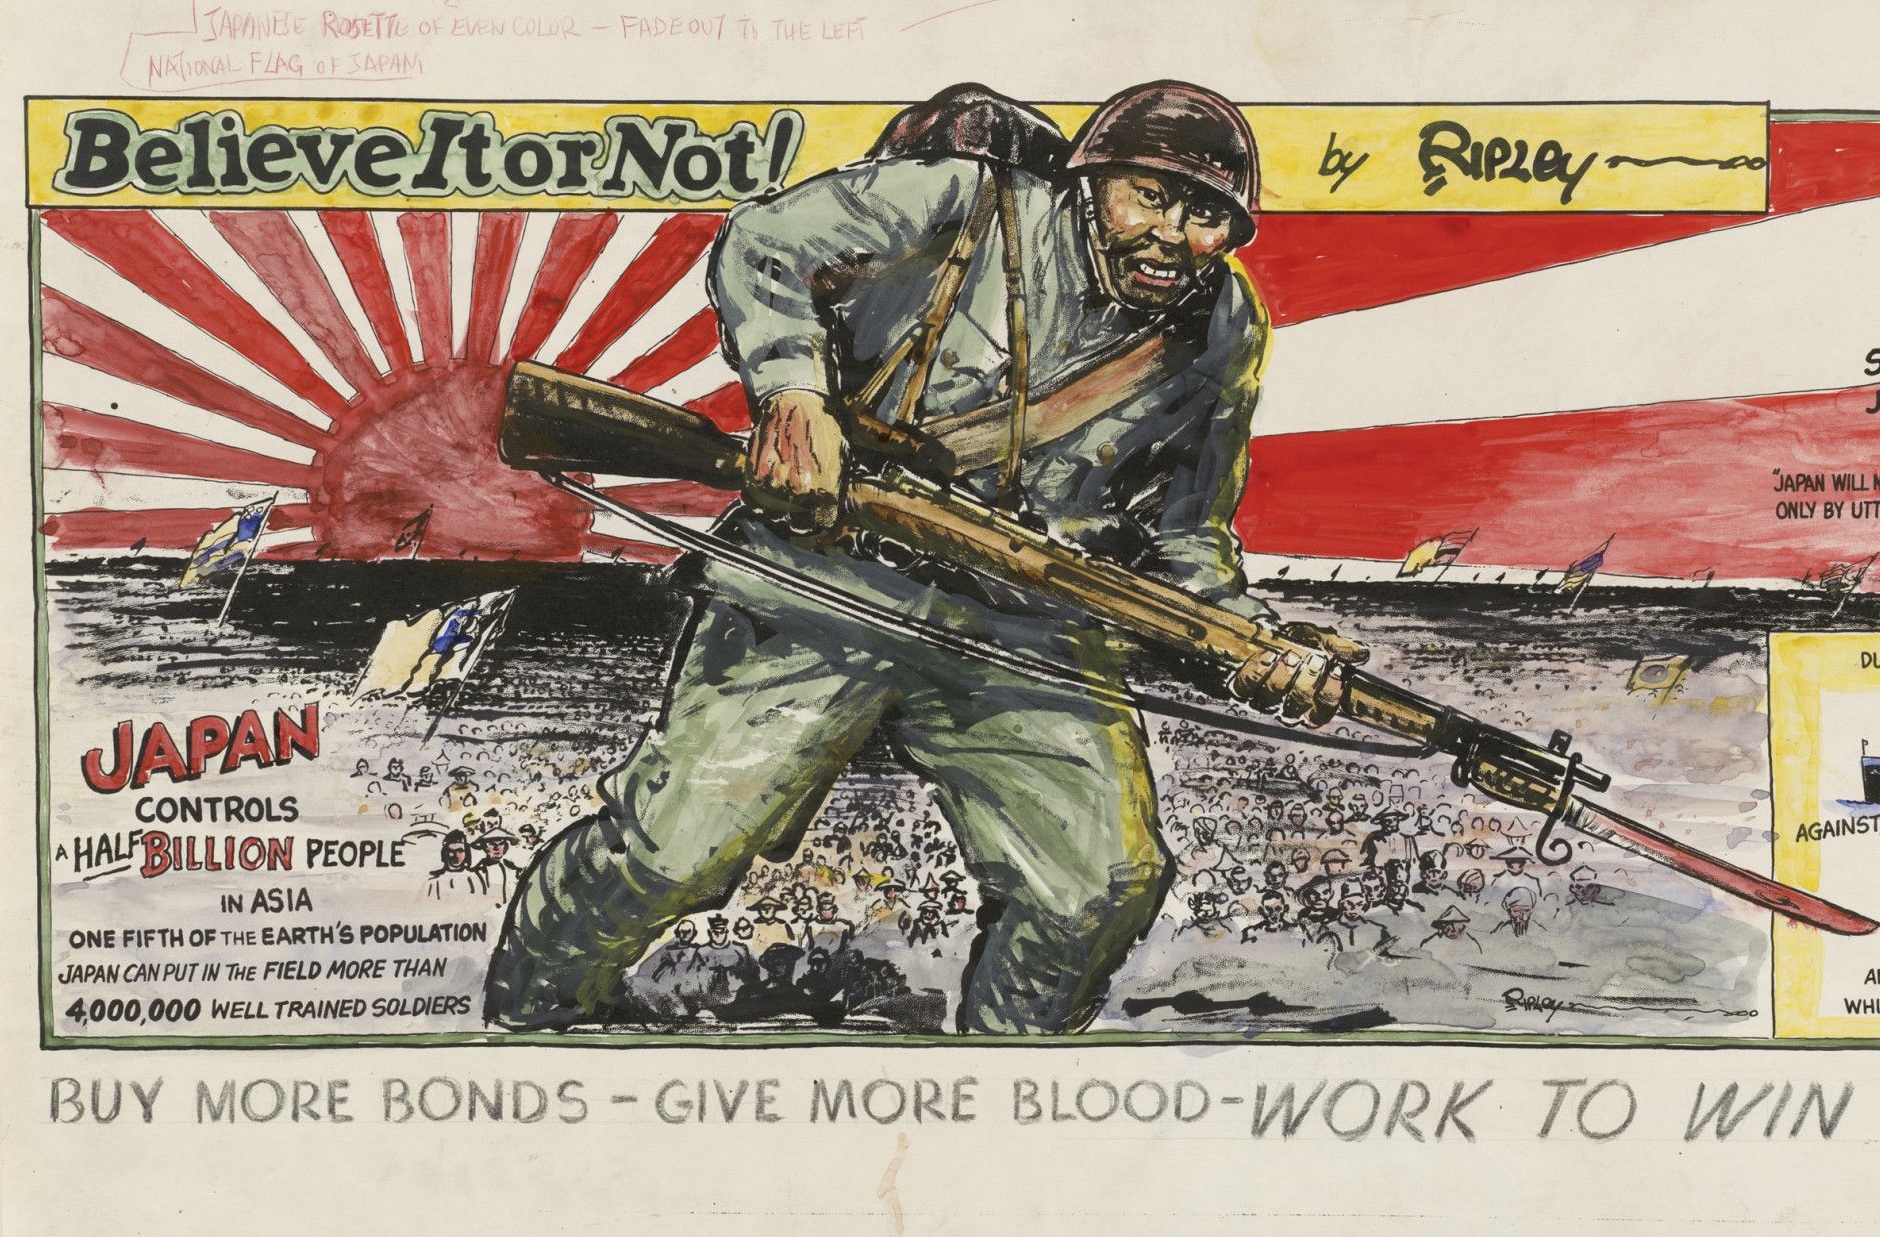 Buy More Bonds - Give More Blood - Work to Win the War!